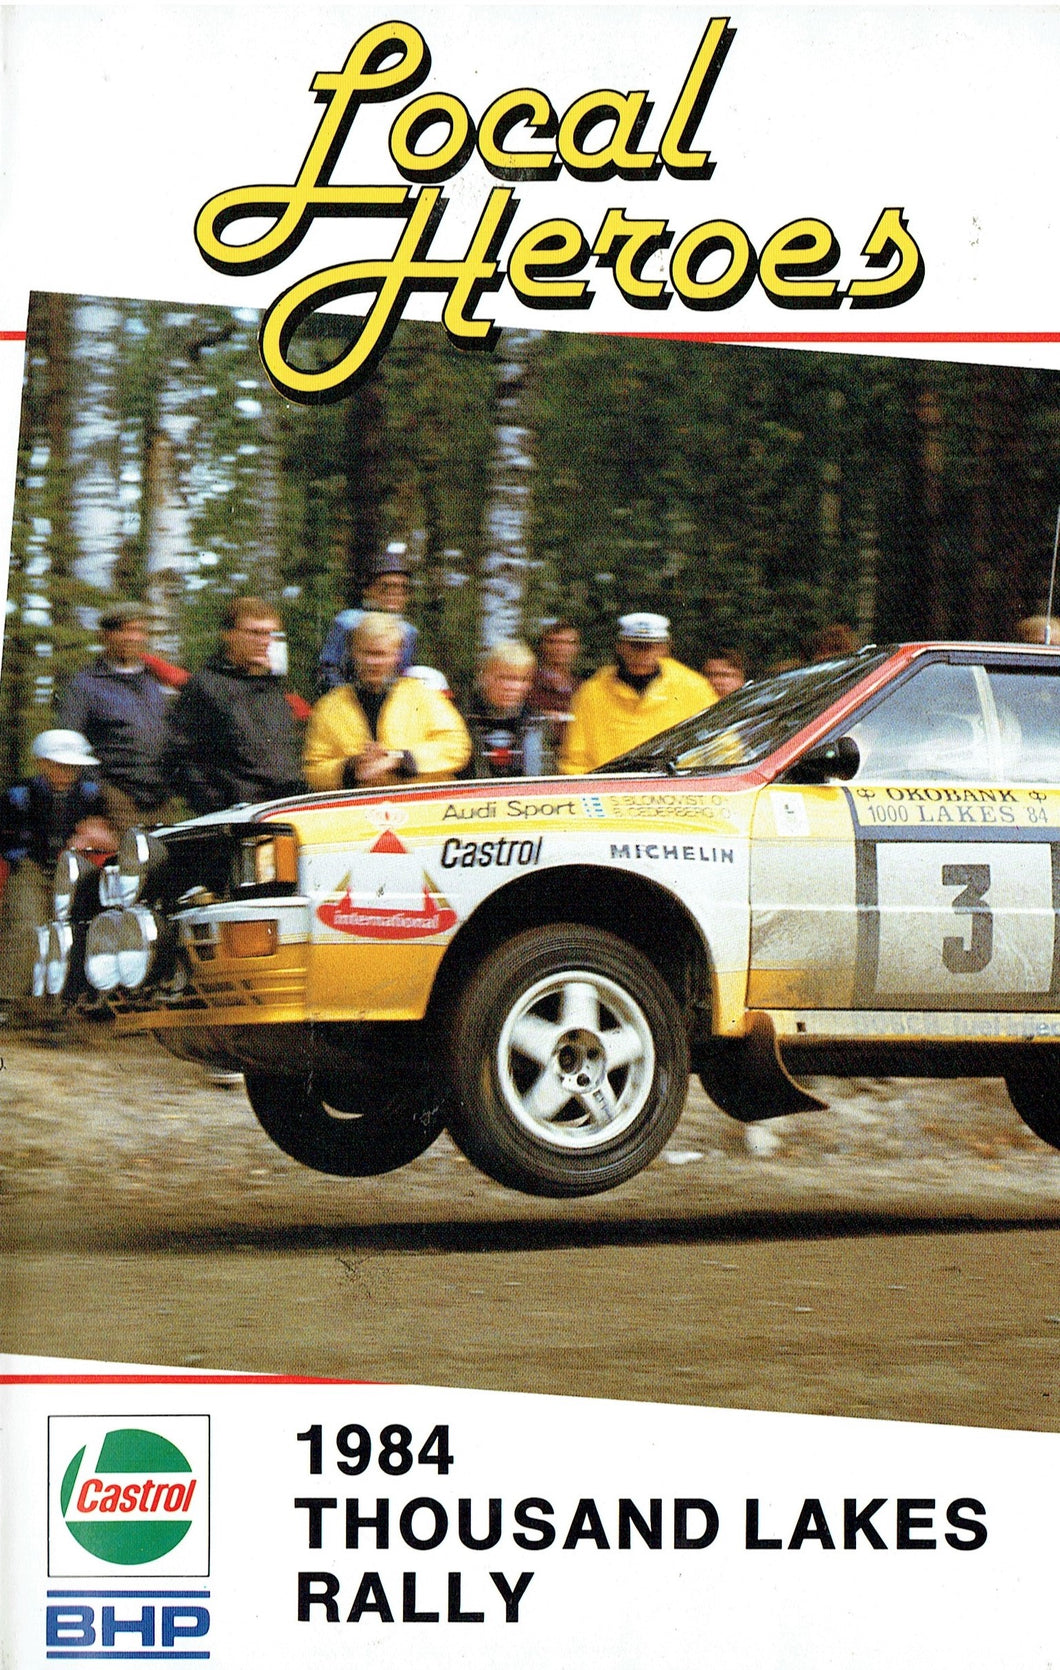 Local Heroes: 1984 Thousand Lakes Rally (1000 Lakes) [VHS]